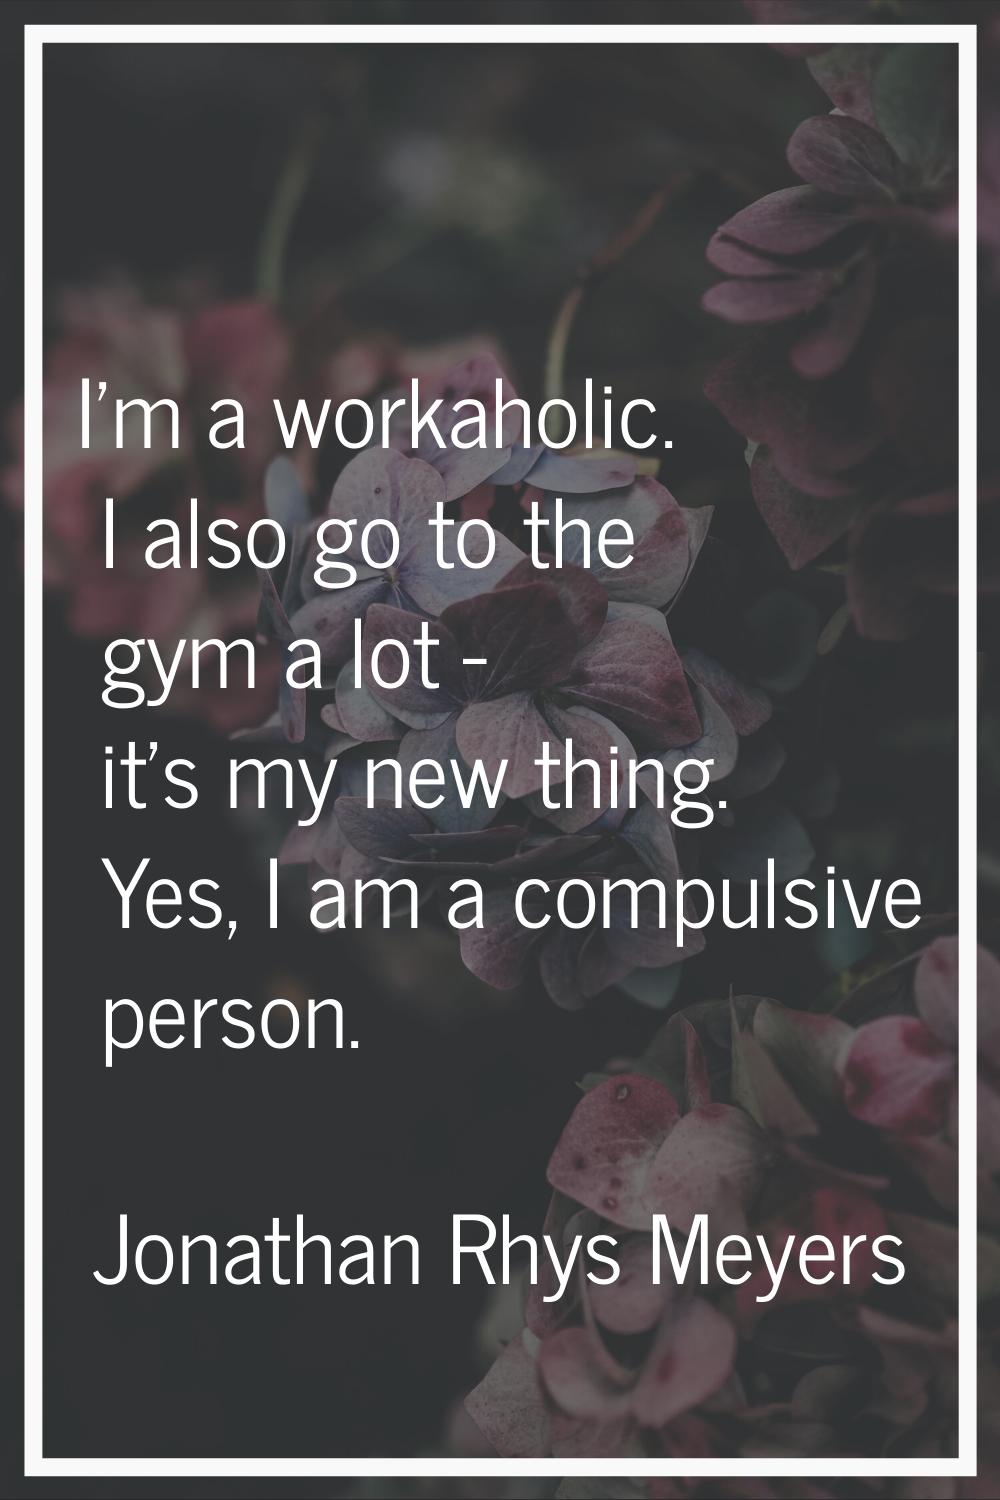 I'm a workaholic. I also go to the gym a lot - it's my new thing. Yes, I am a compulsive person.